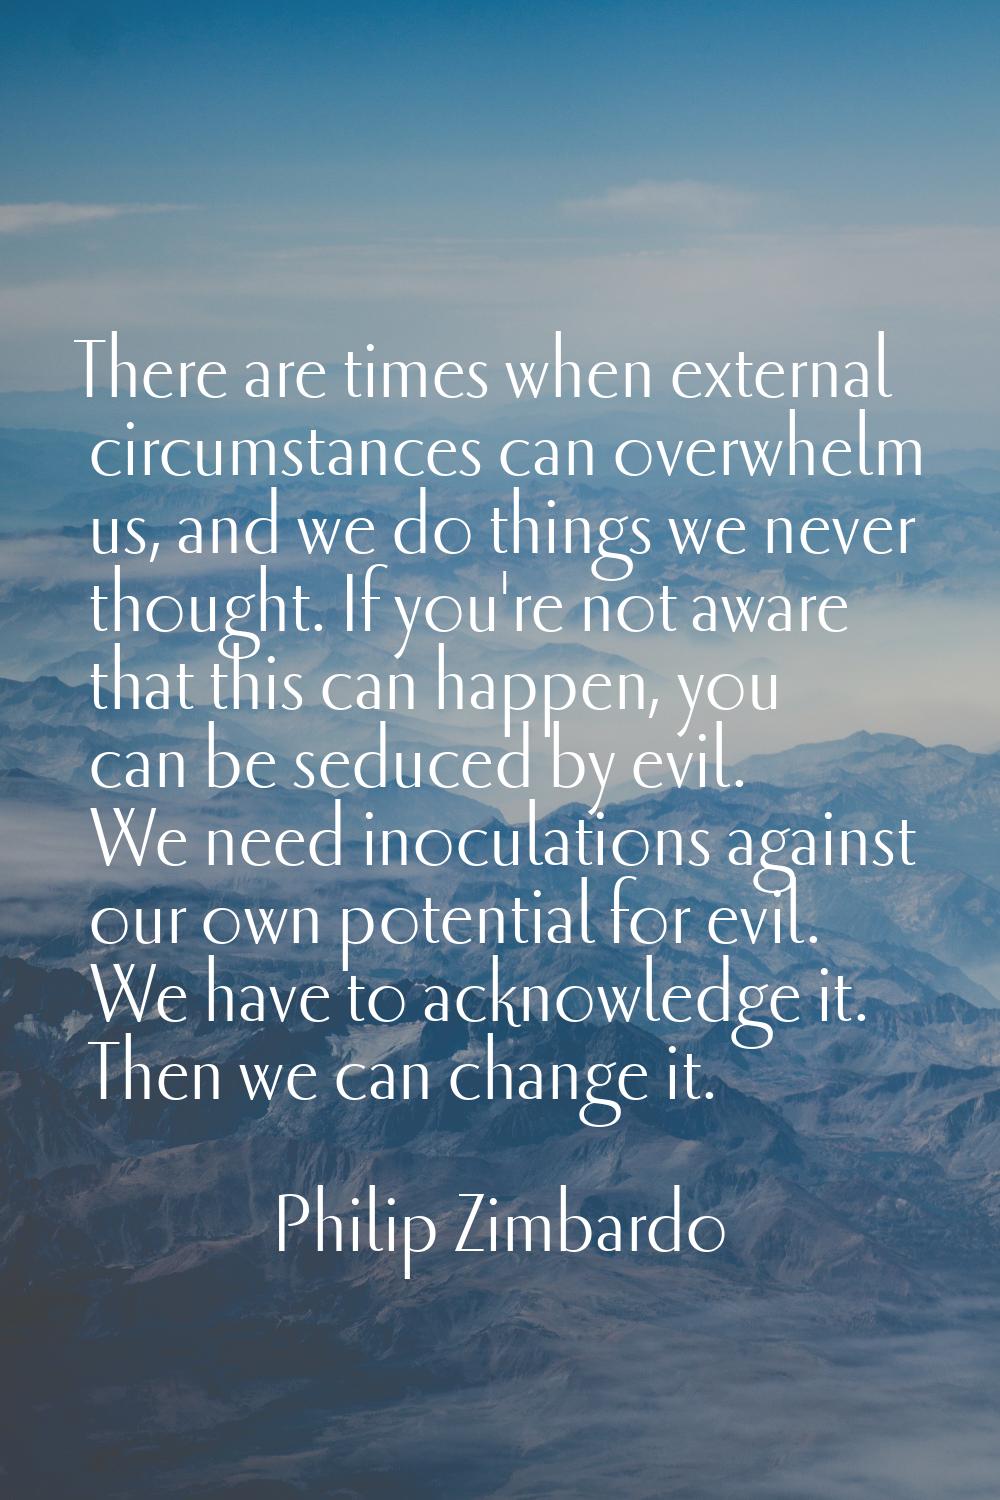 There are times when external circumstances can overwhelm us, and we do things we never thought. If